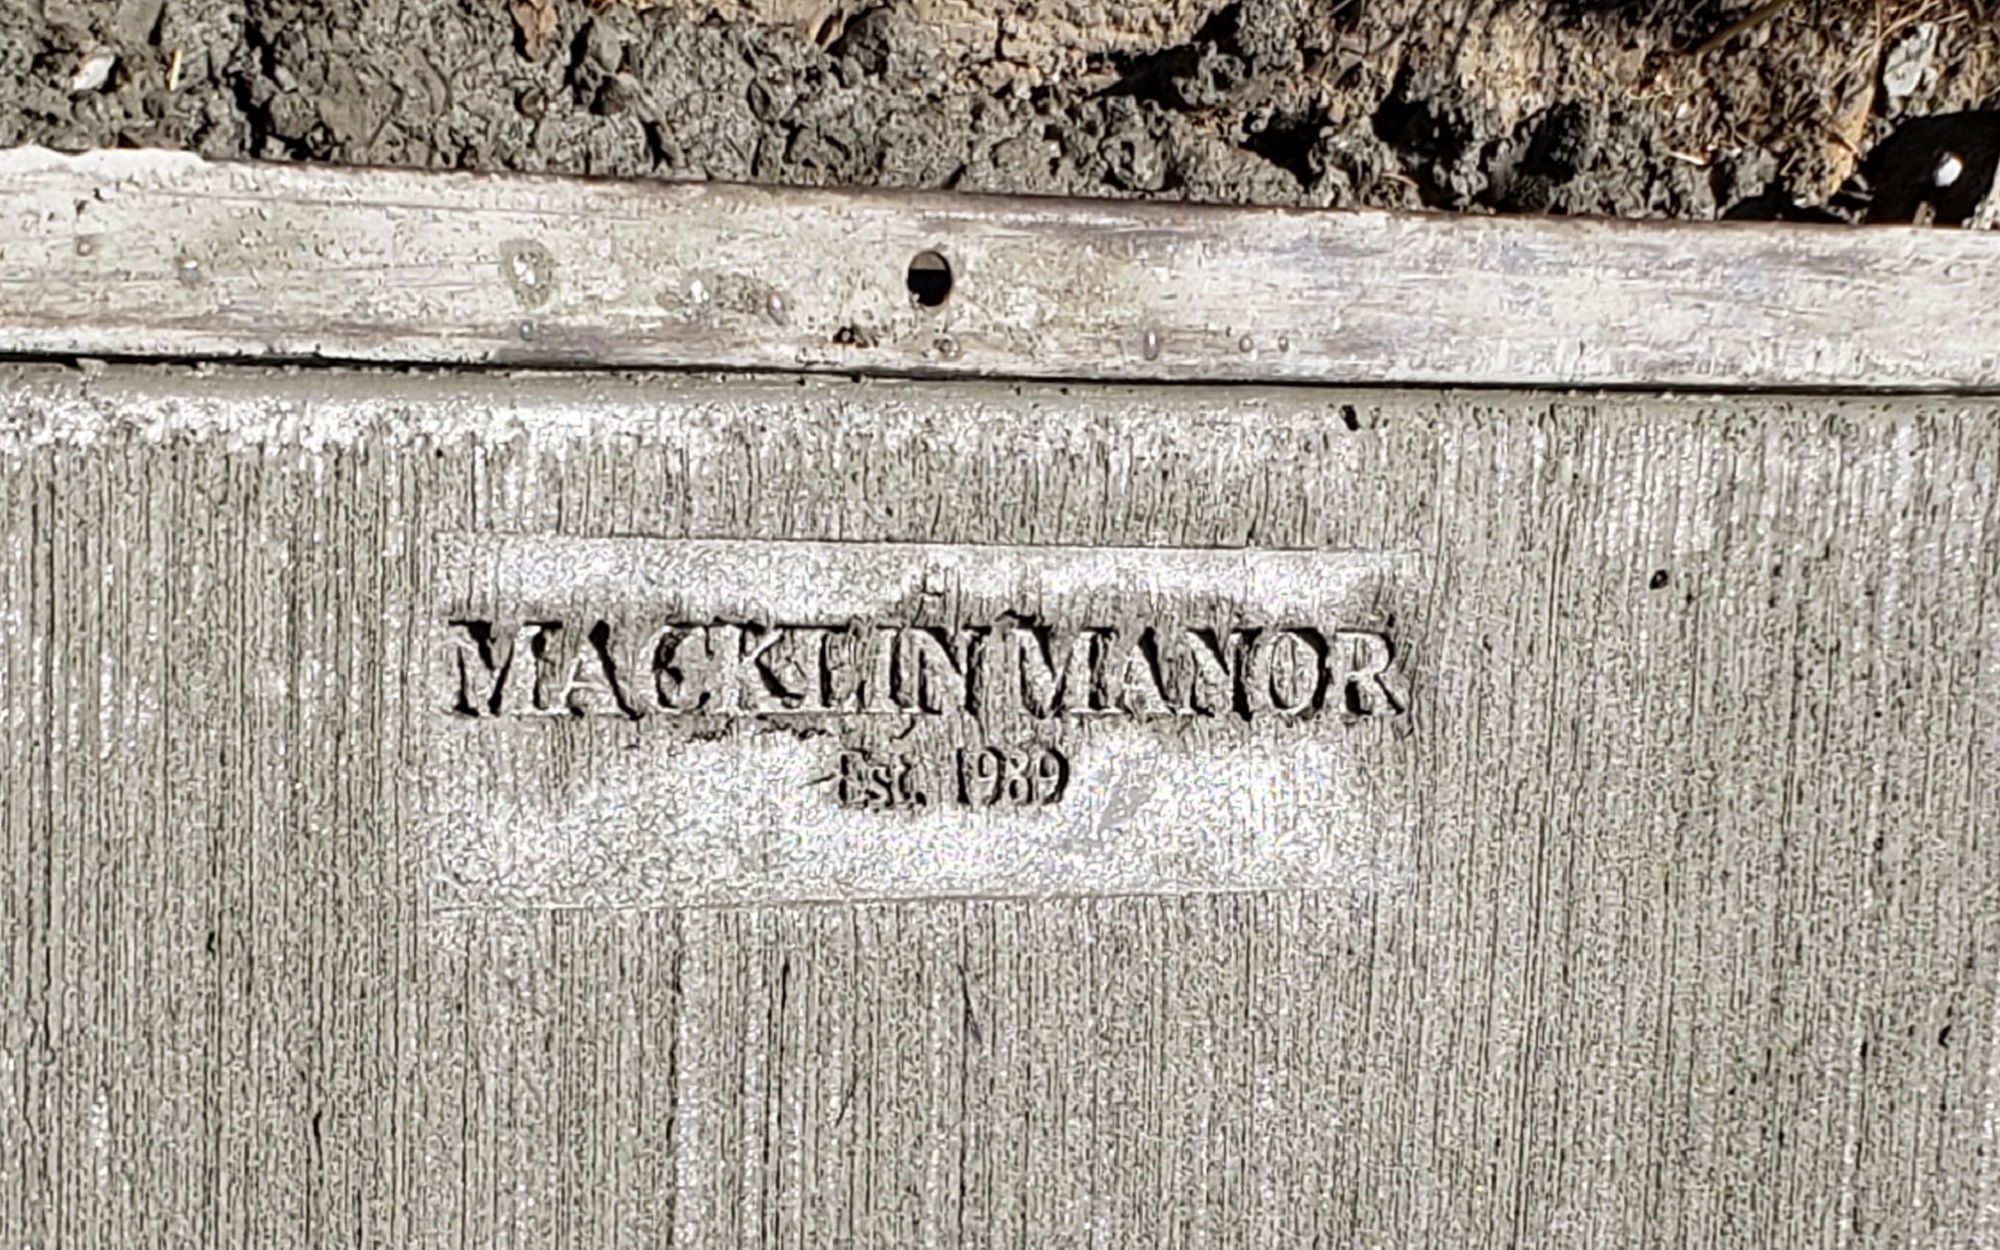 A section of concrete stamped with the phrase "Macklin Manor. Est 1989"